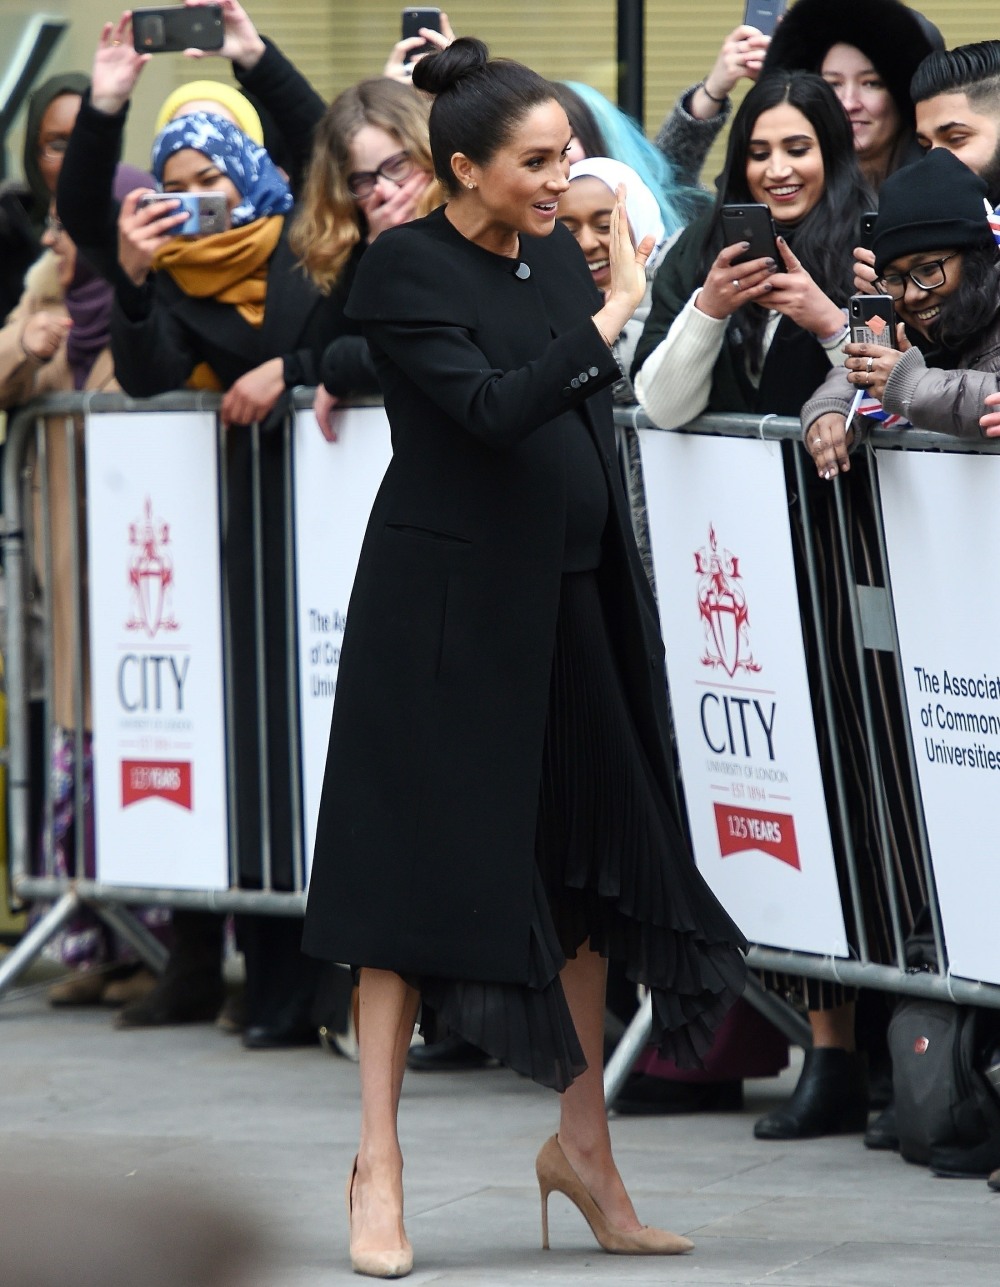 Pregnant Meghan Markle greets members of the public while leaving the Association of Commonwealth Universities in London